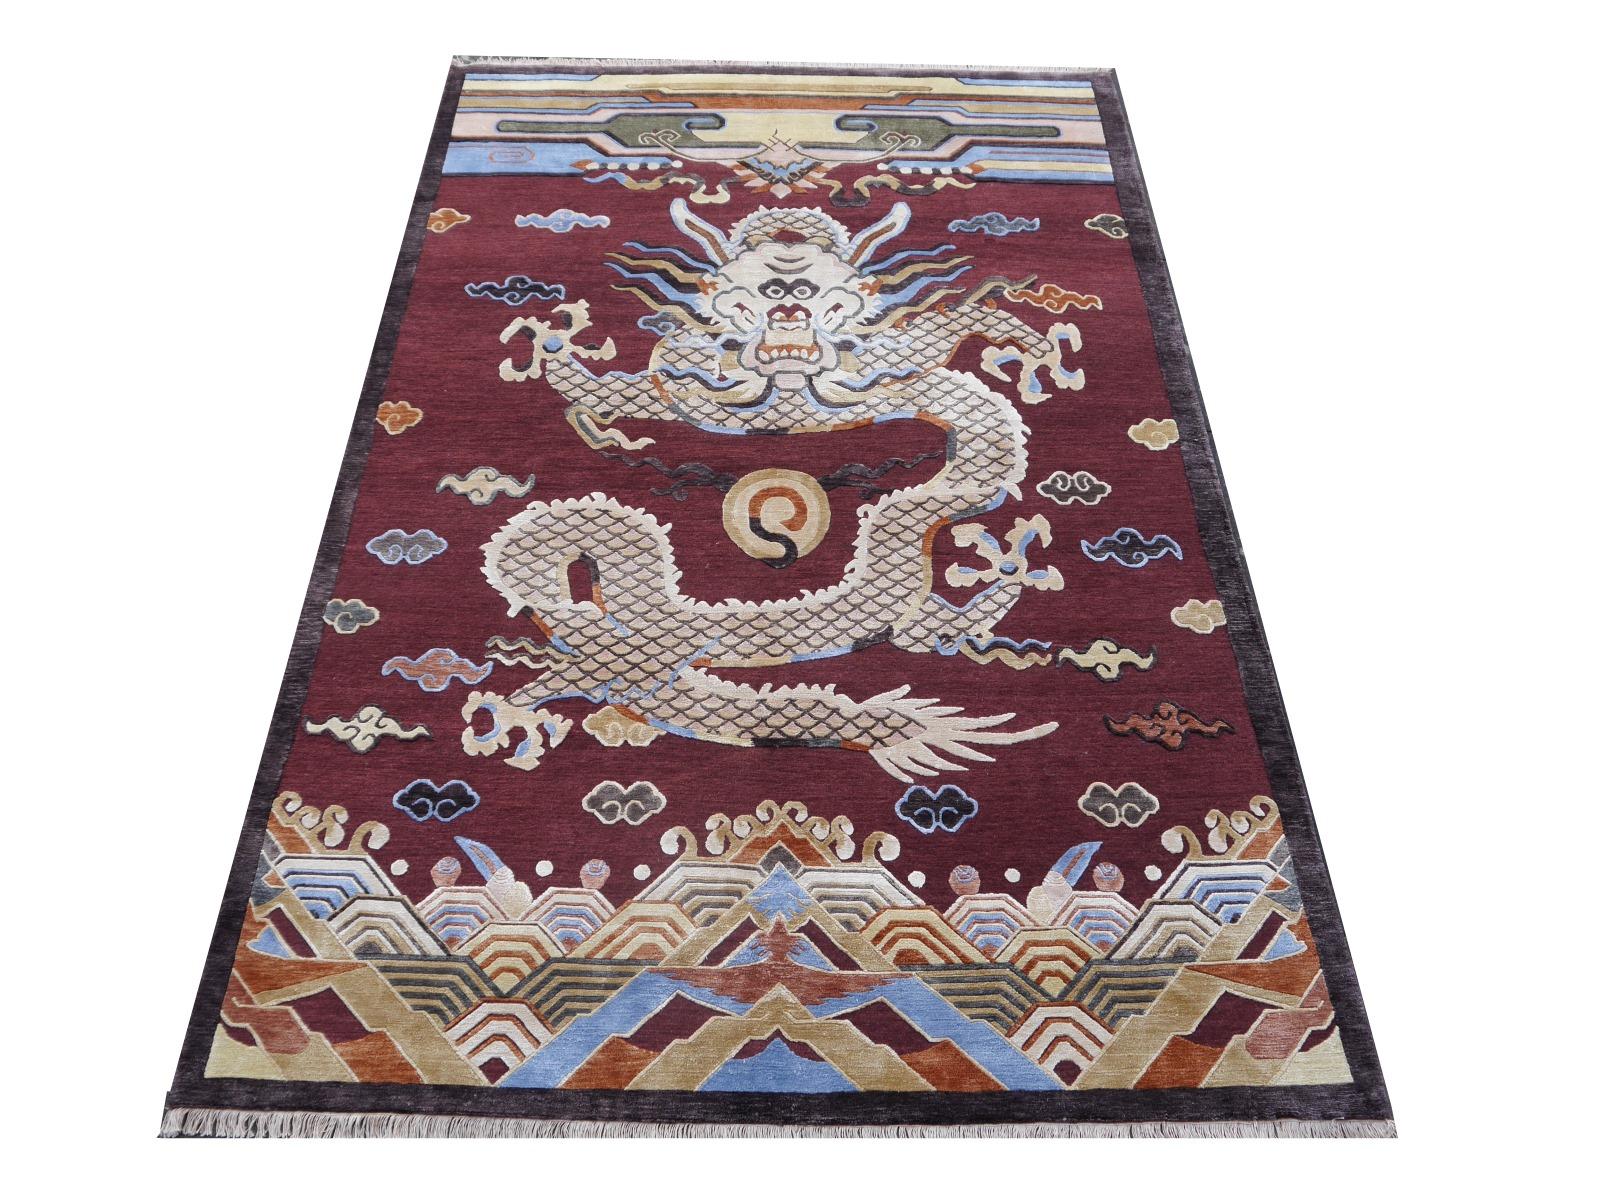 Tibetan Dragon design rug with wool and silk pile in style of Antique Imperial Chinese Kansu carpets 8 x 5.4 ft.

A beautiful contemporary dragon design rug, hand knotted using finest Chinese mulberry silk (60%) and Tibetan highland wool